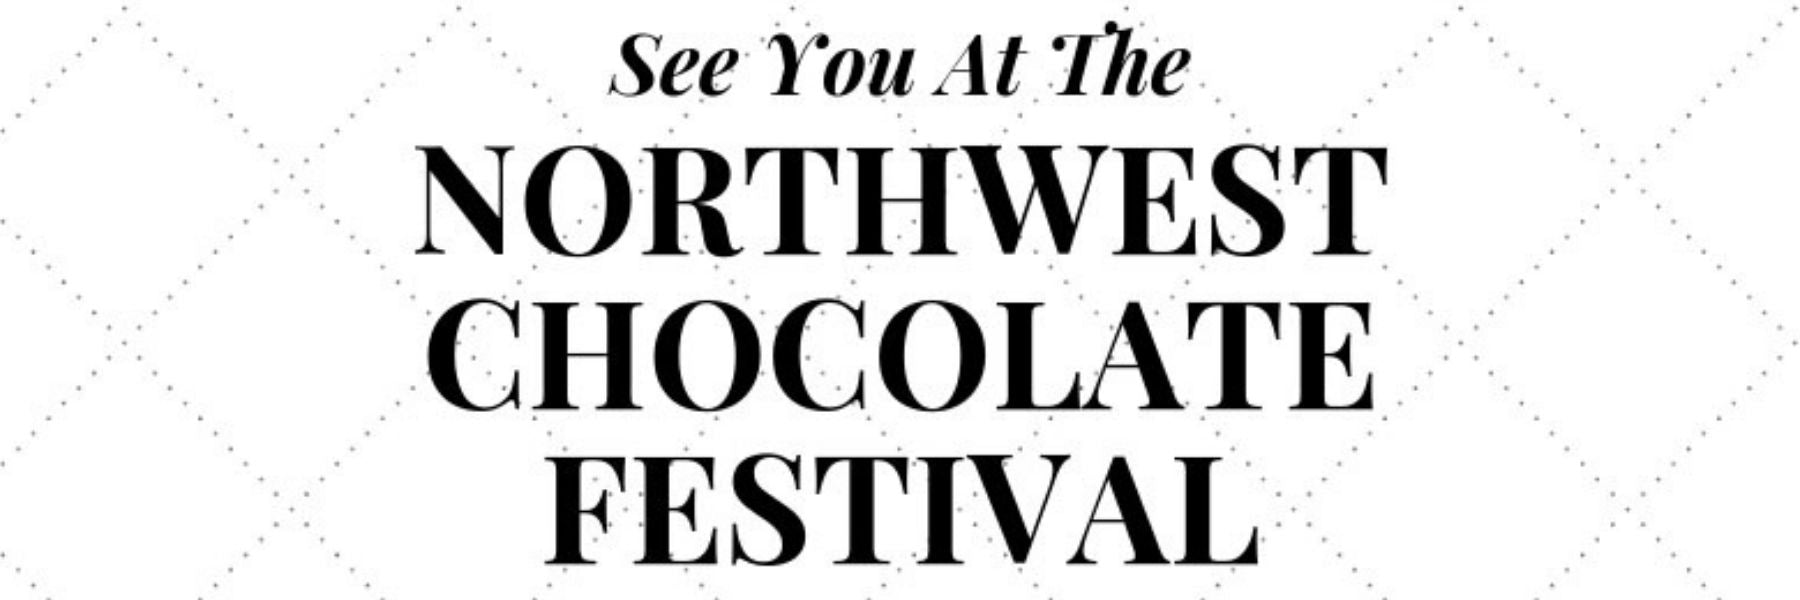 See You At The Northwest Chocolate Festival Graphic